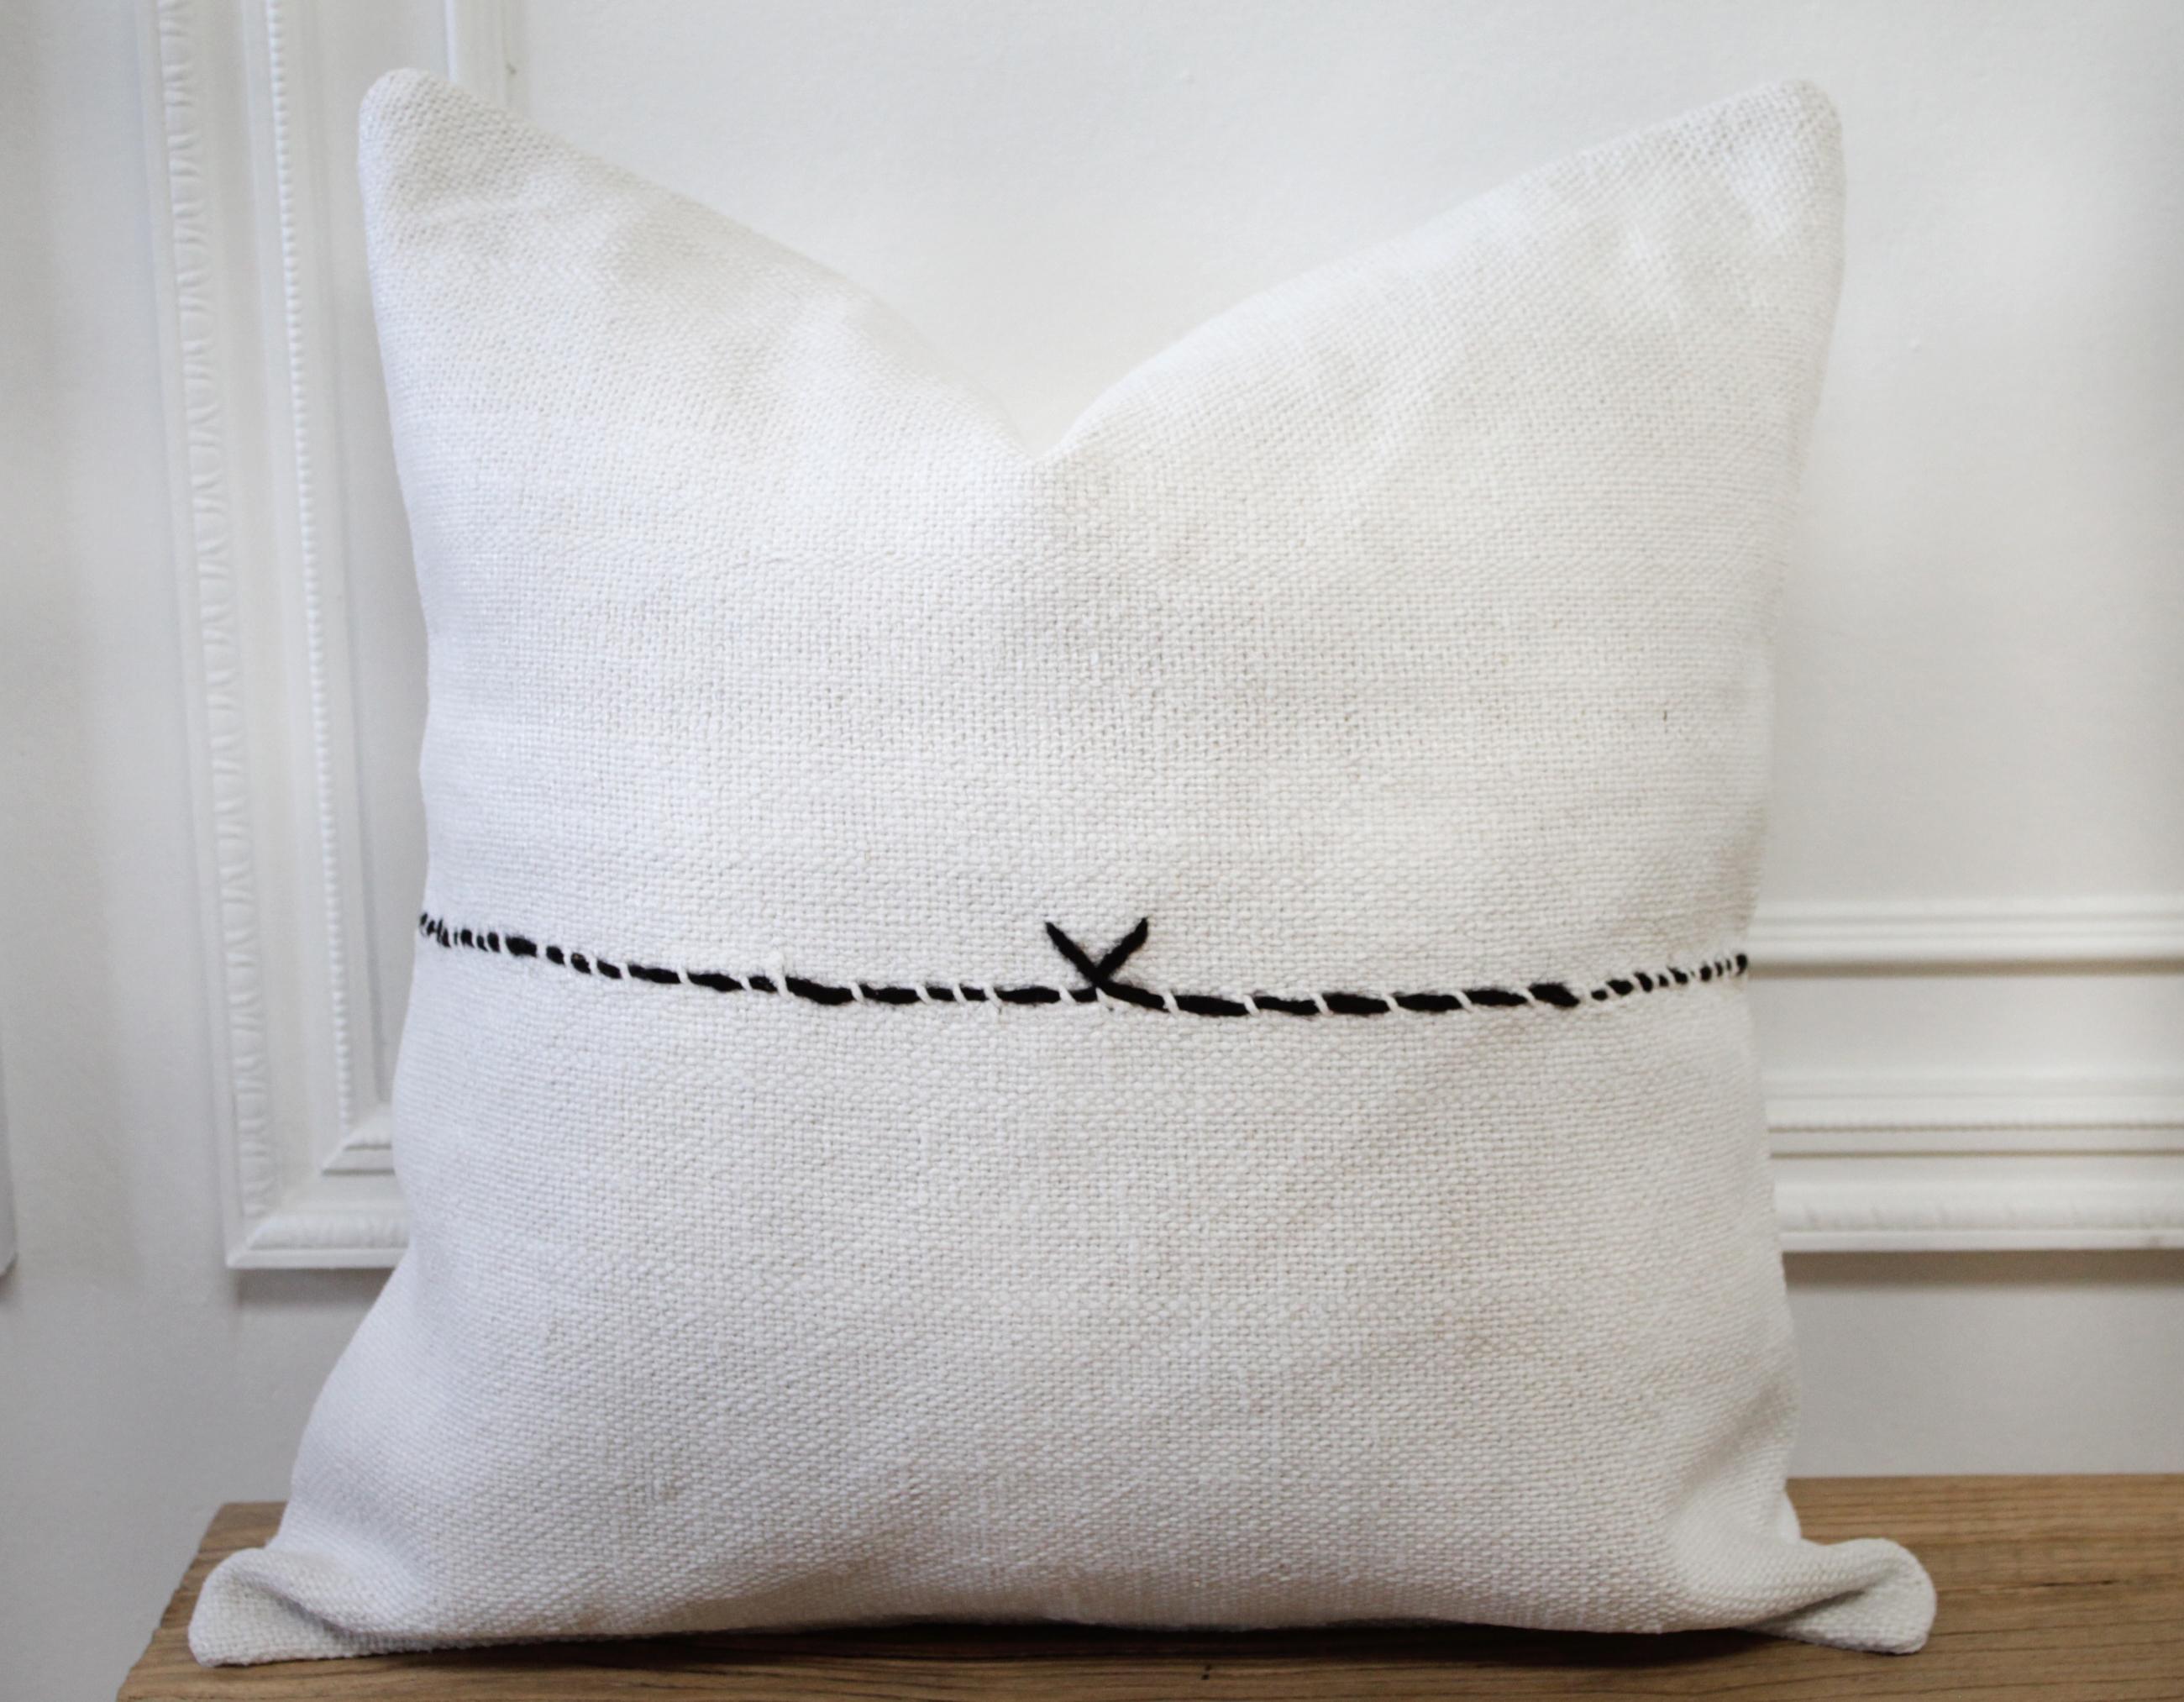 Vintage Turkish Hemp rug pillow in off-white with stitched pattern on face of the pillow. This is a beautiful original hemp rug, in a white to off-white color with goat hair textured Minimalist stripe pattern. The backside is a coordinating fabric